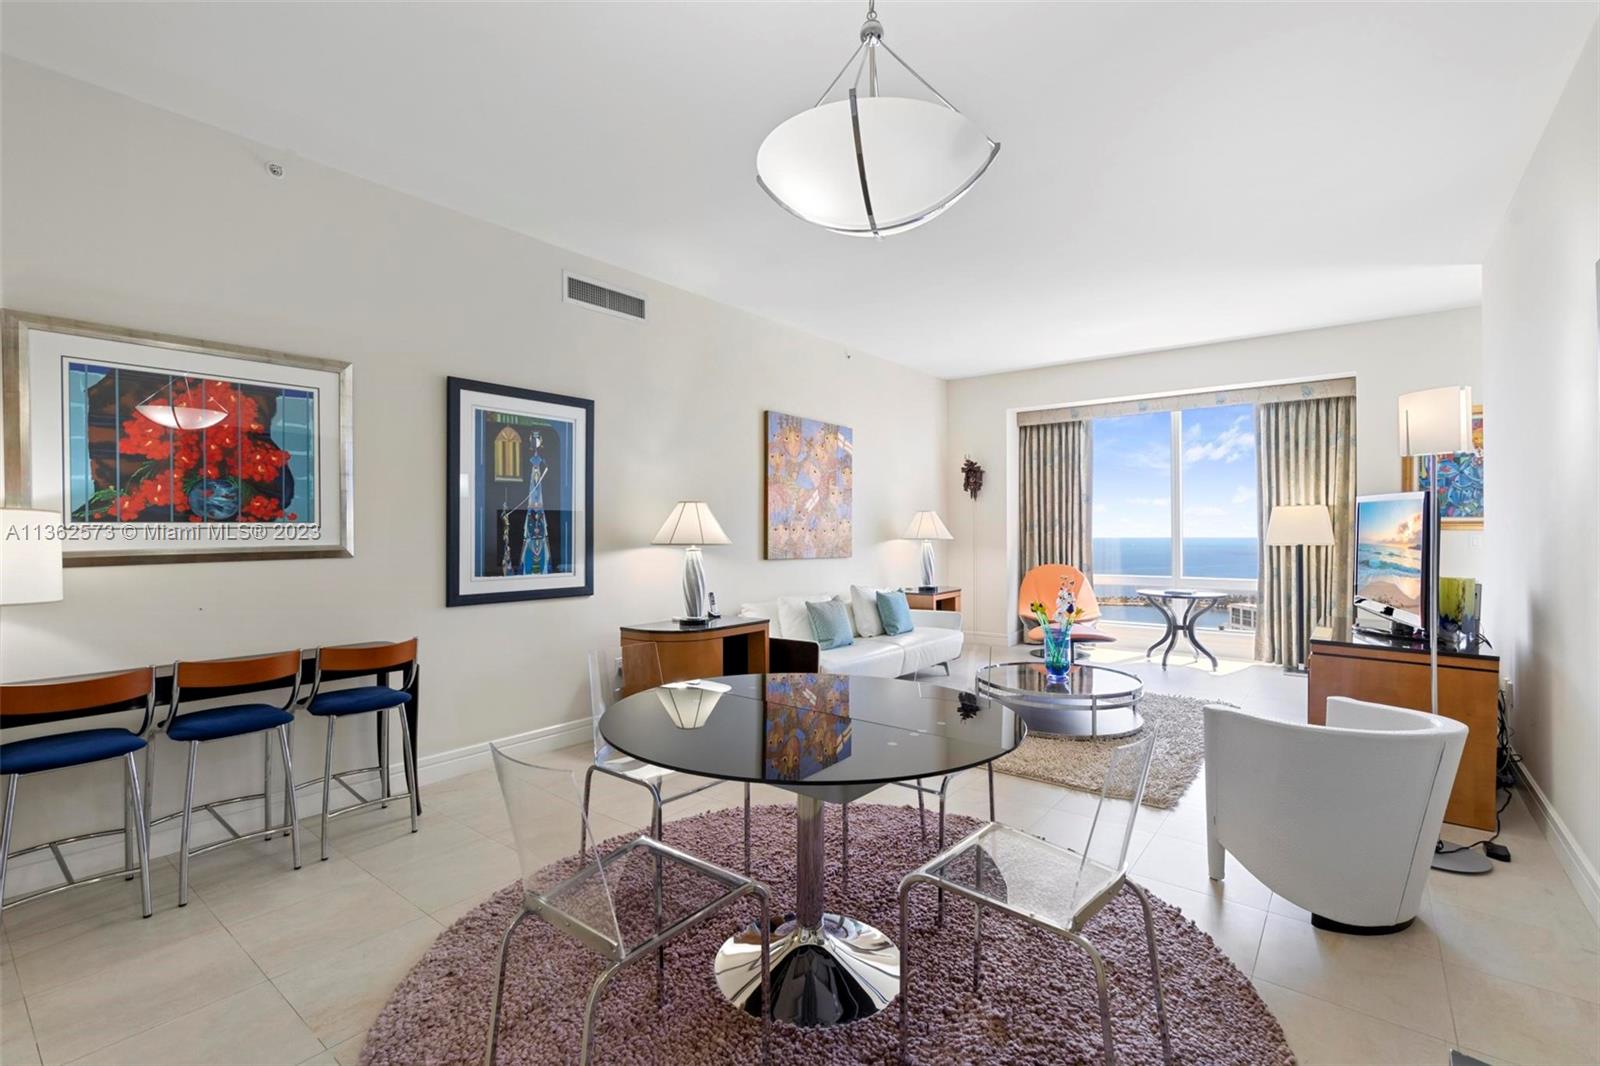 Beautiful 2 bedroom / 2 bathroom with 1,705 square feet split floor plan.  Amazing bay/ocean and Brickell Avenue views.  Laundry room with cabinetry and privacy balcony.  Master bedroom includes 2 separate walk-in closets.  Ten foot ceilings all throughout apartment.